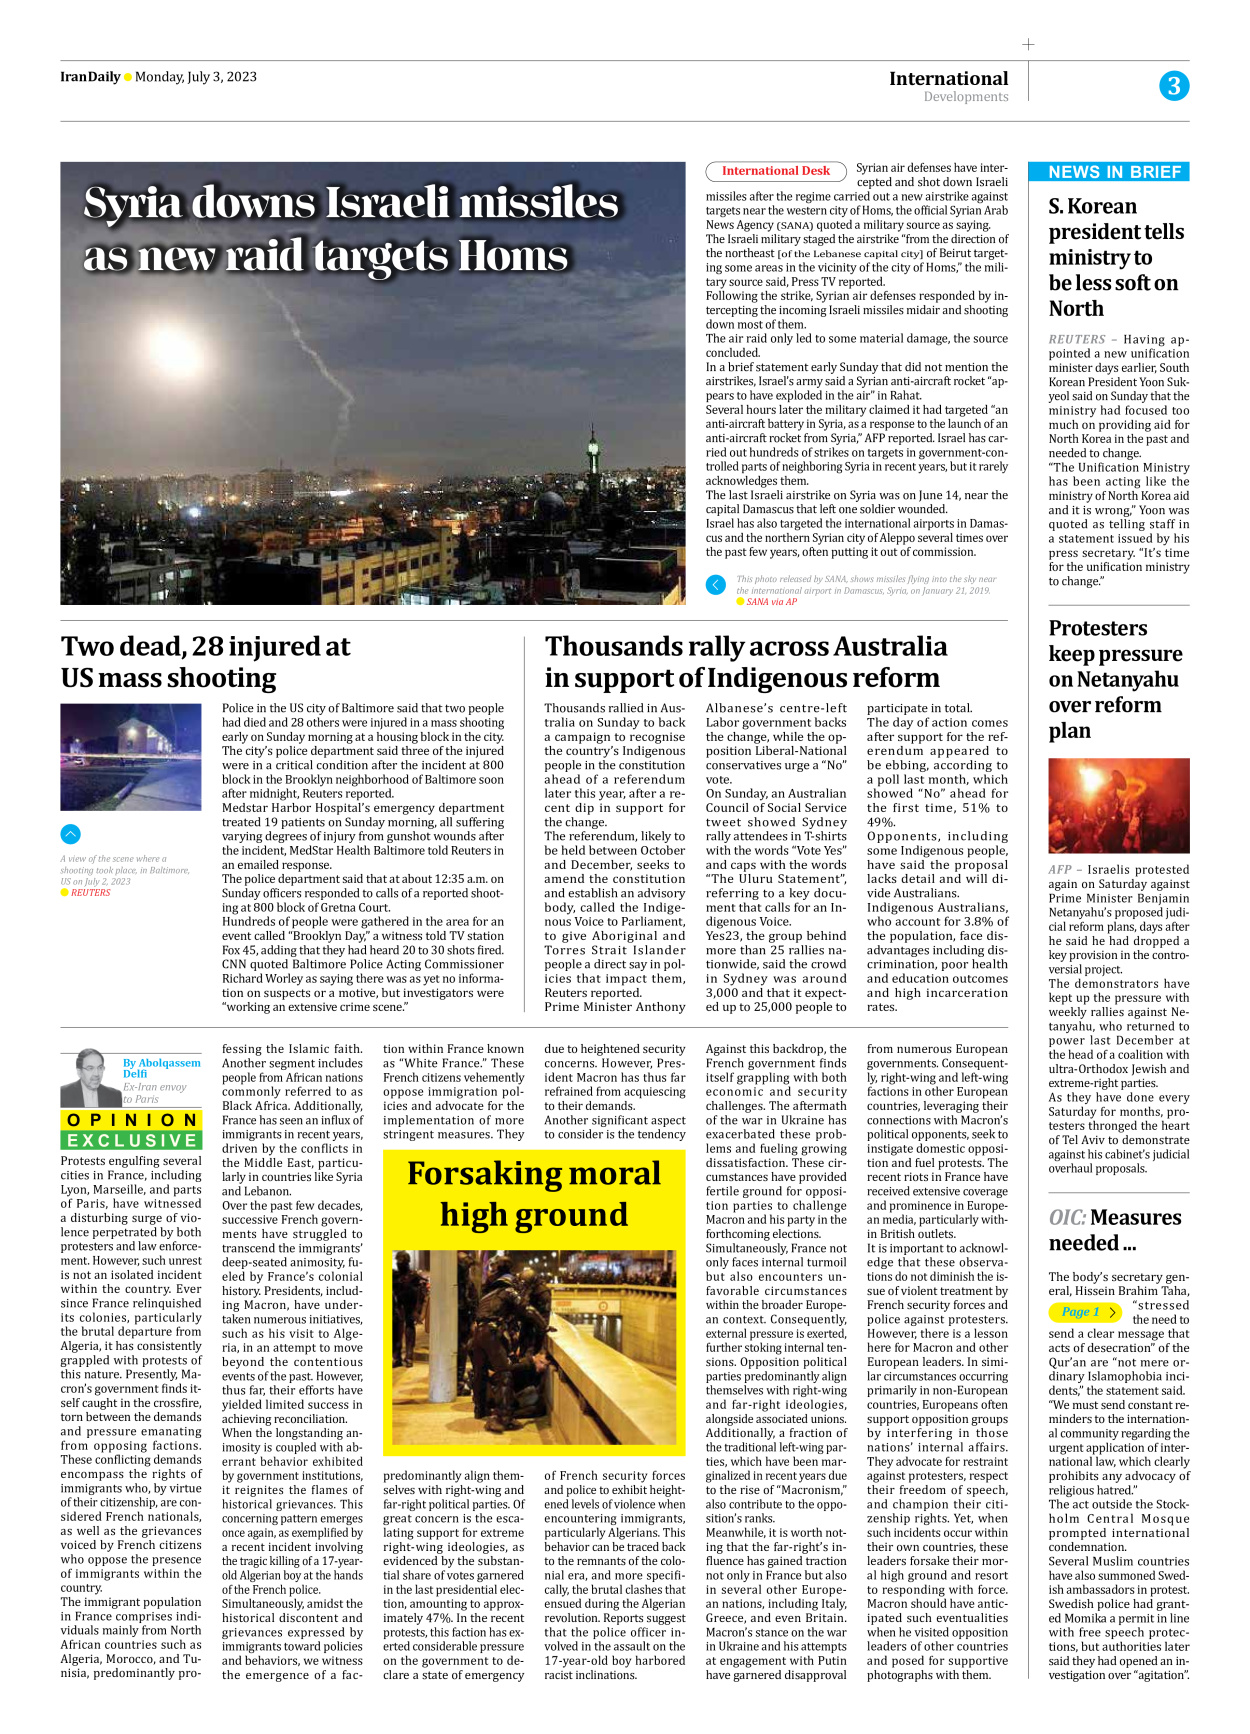 Iran Daily - Number Seven Thousand Three Hundred and Twenty Nine - 03 July 2023 - Page 3